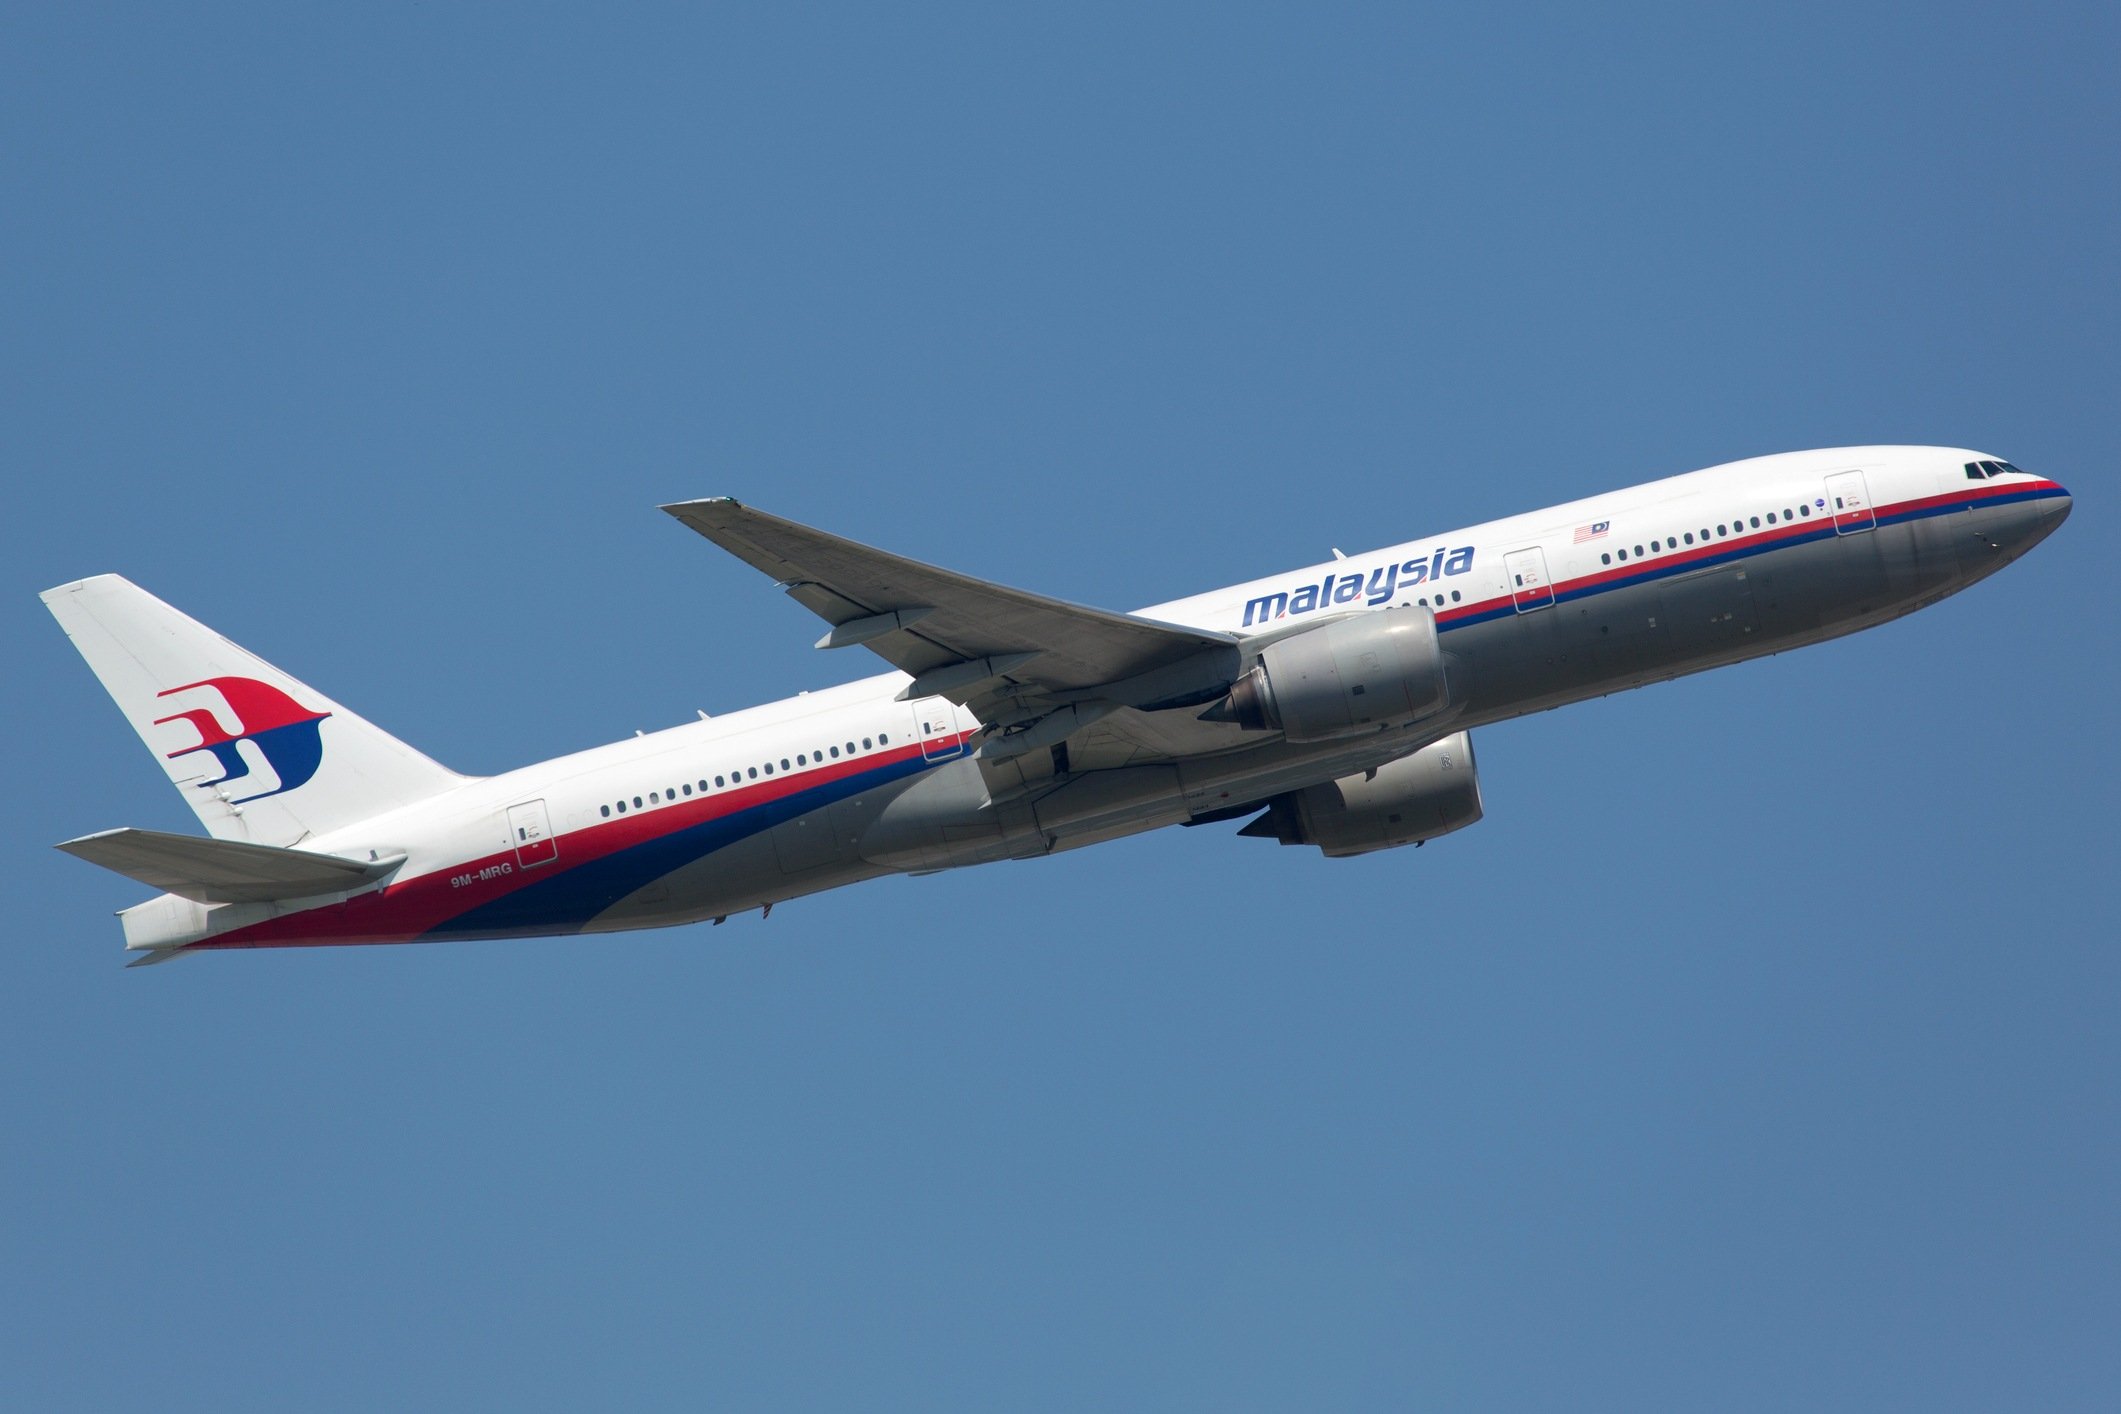 Malaysia Airlines Boeing 777-200 sister aircraft of crashed planes